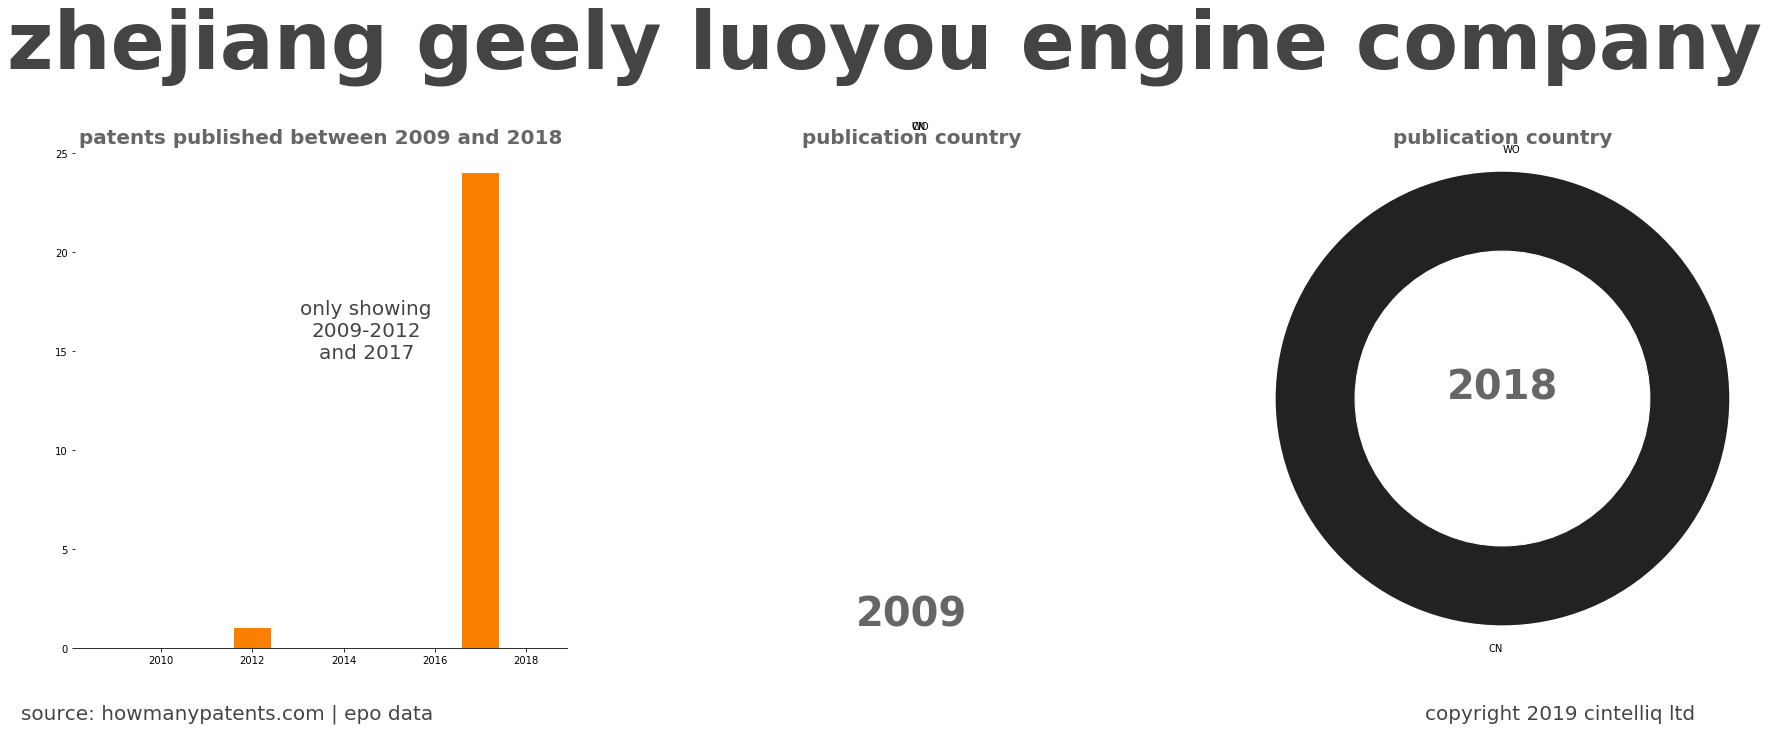 summary of patents for Zhejiang Geely Luoyou Engine Company